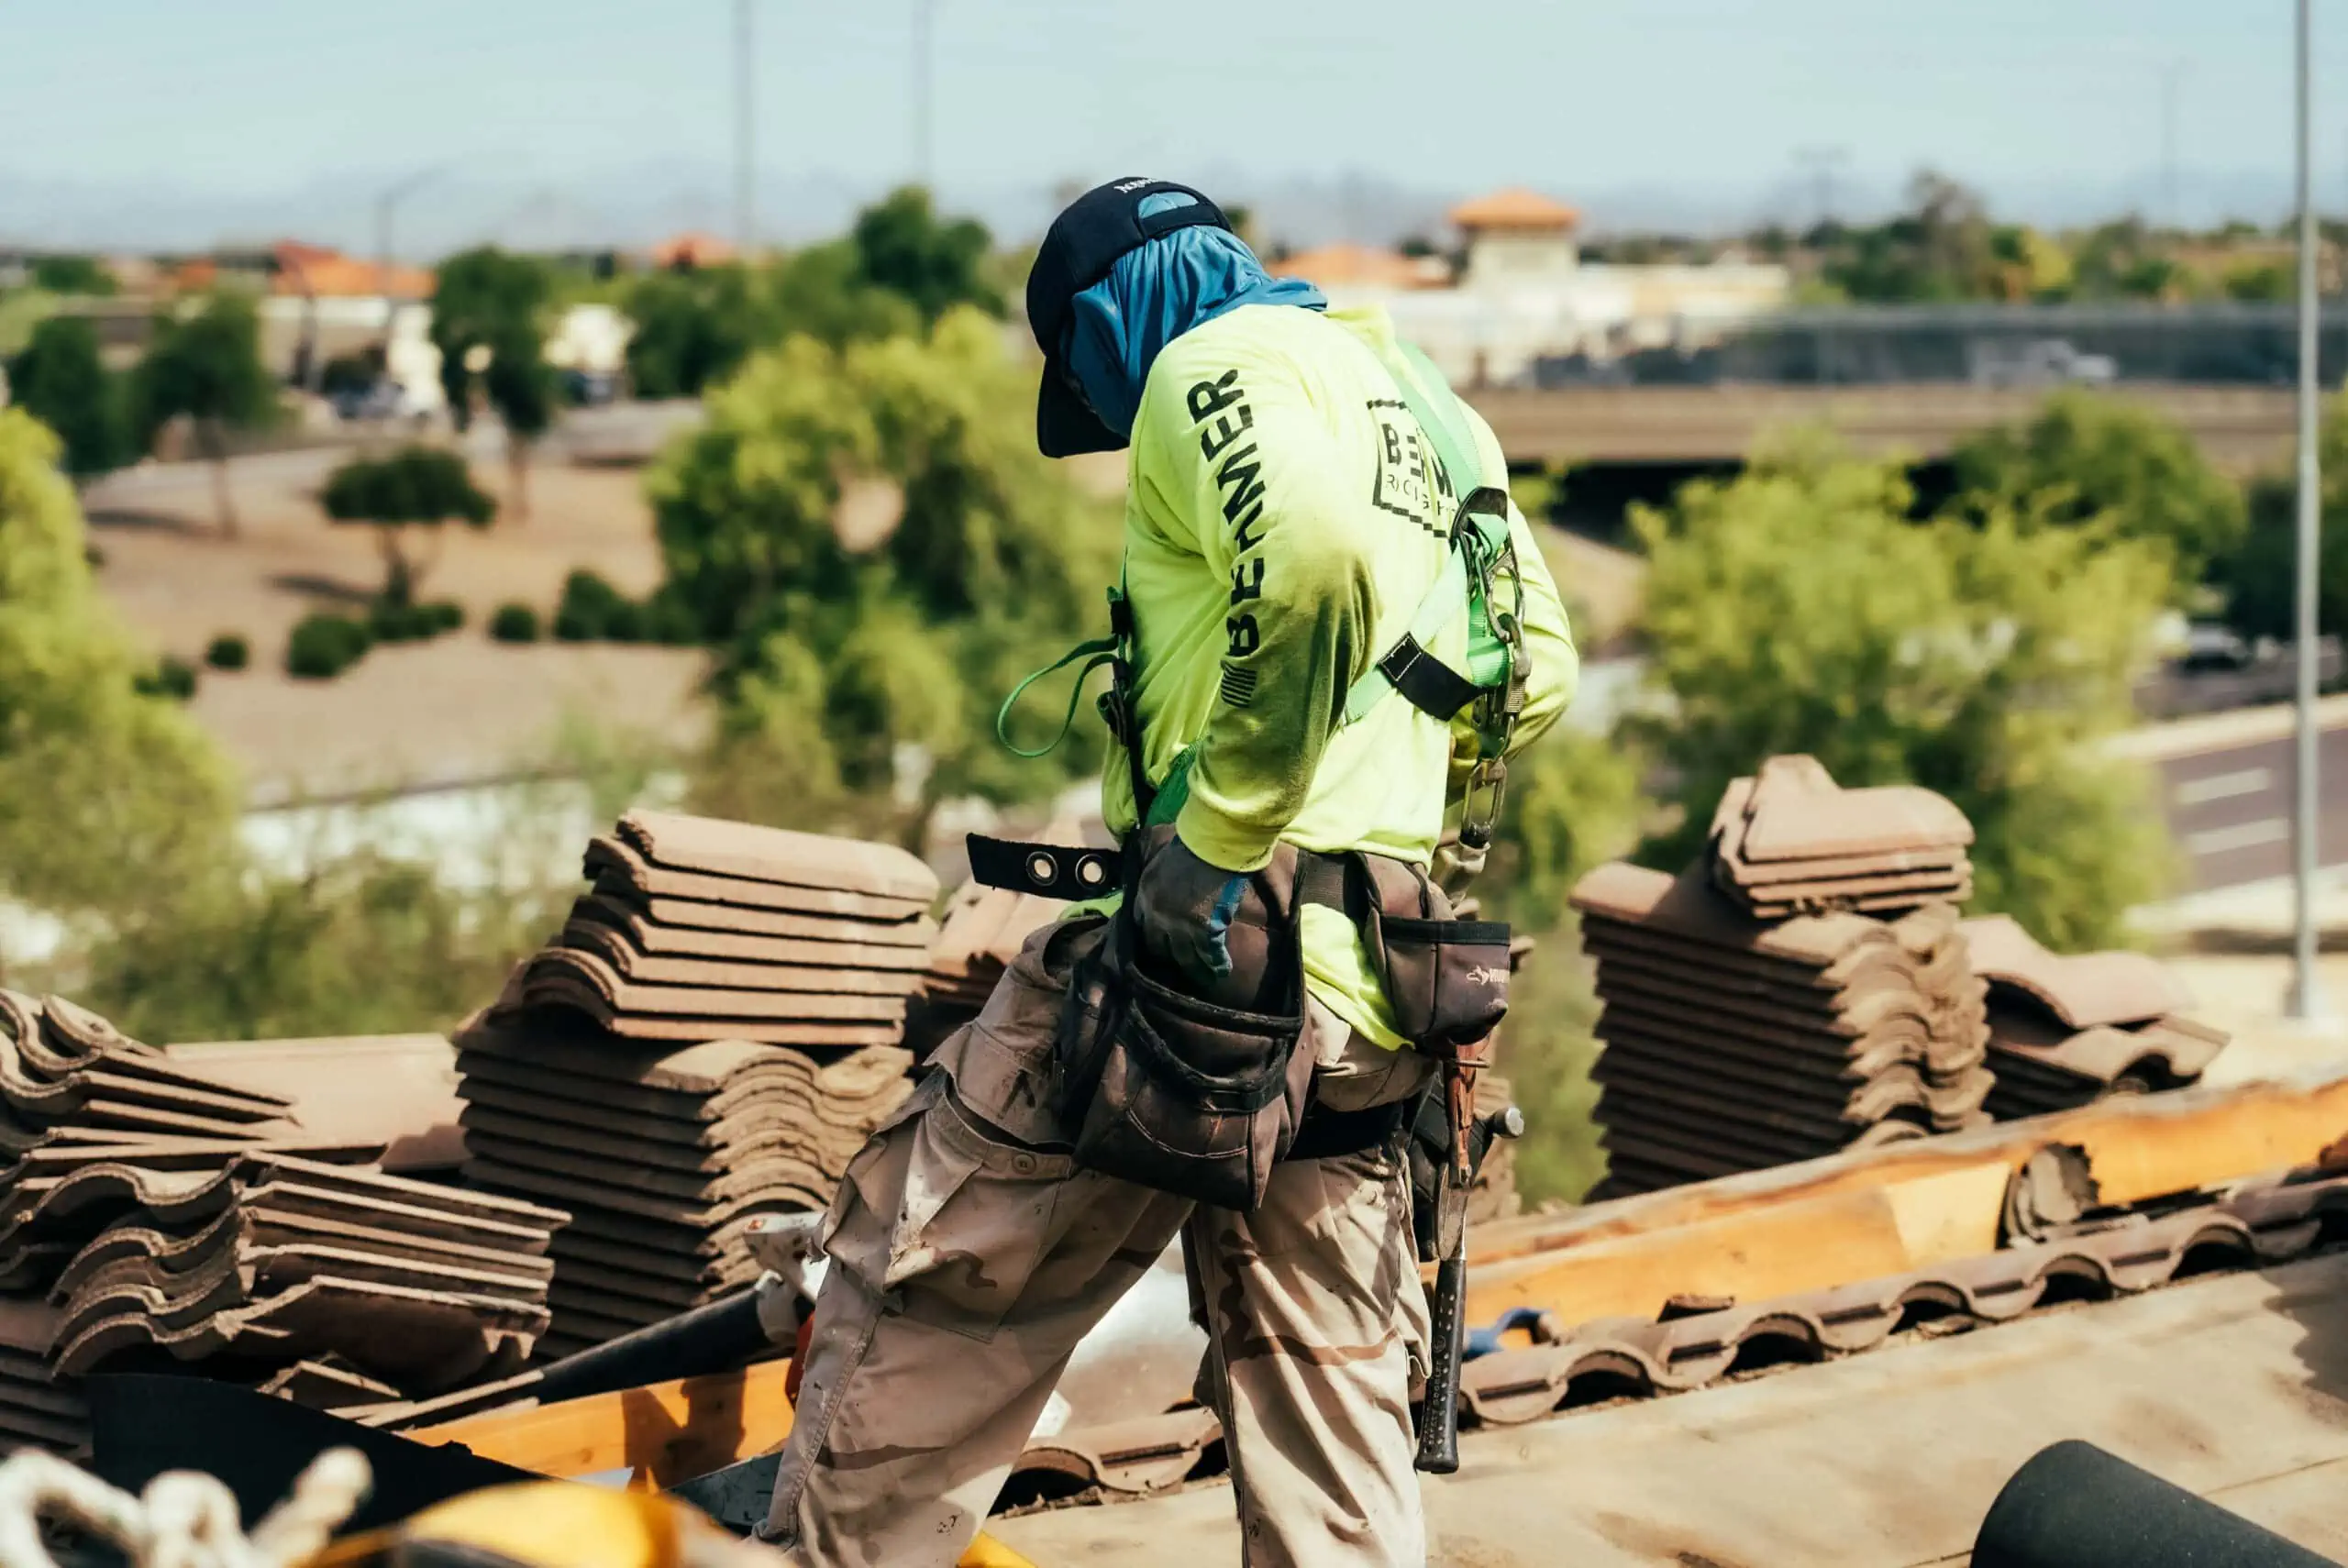 Roofing technician securing tiles during a re-felt project in McCormick Ranch.